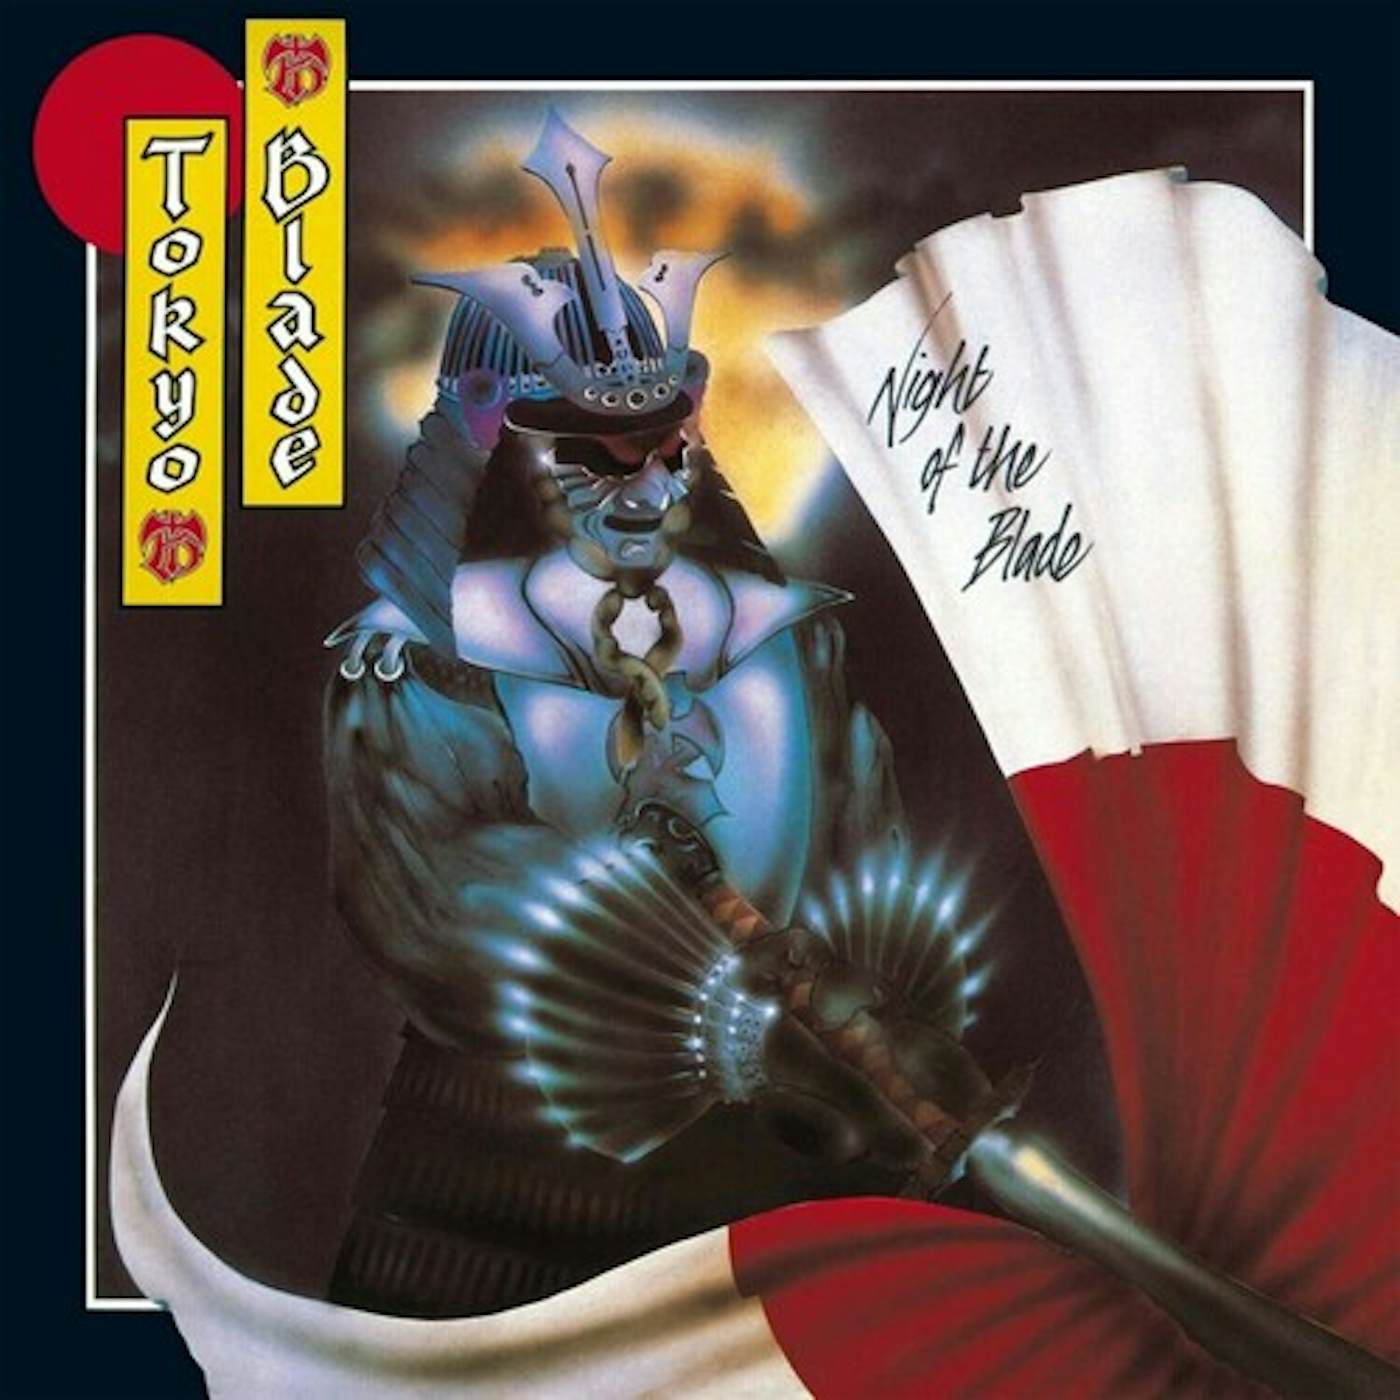 Tokyo Blade NIGHT OF THE BLADE - RED/WHITE BI-COLOR Vinyl Record